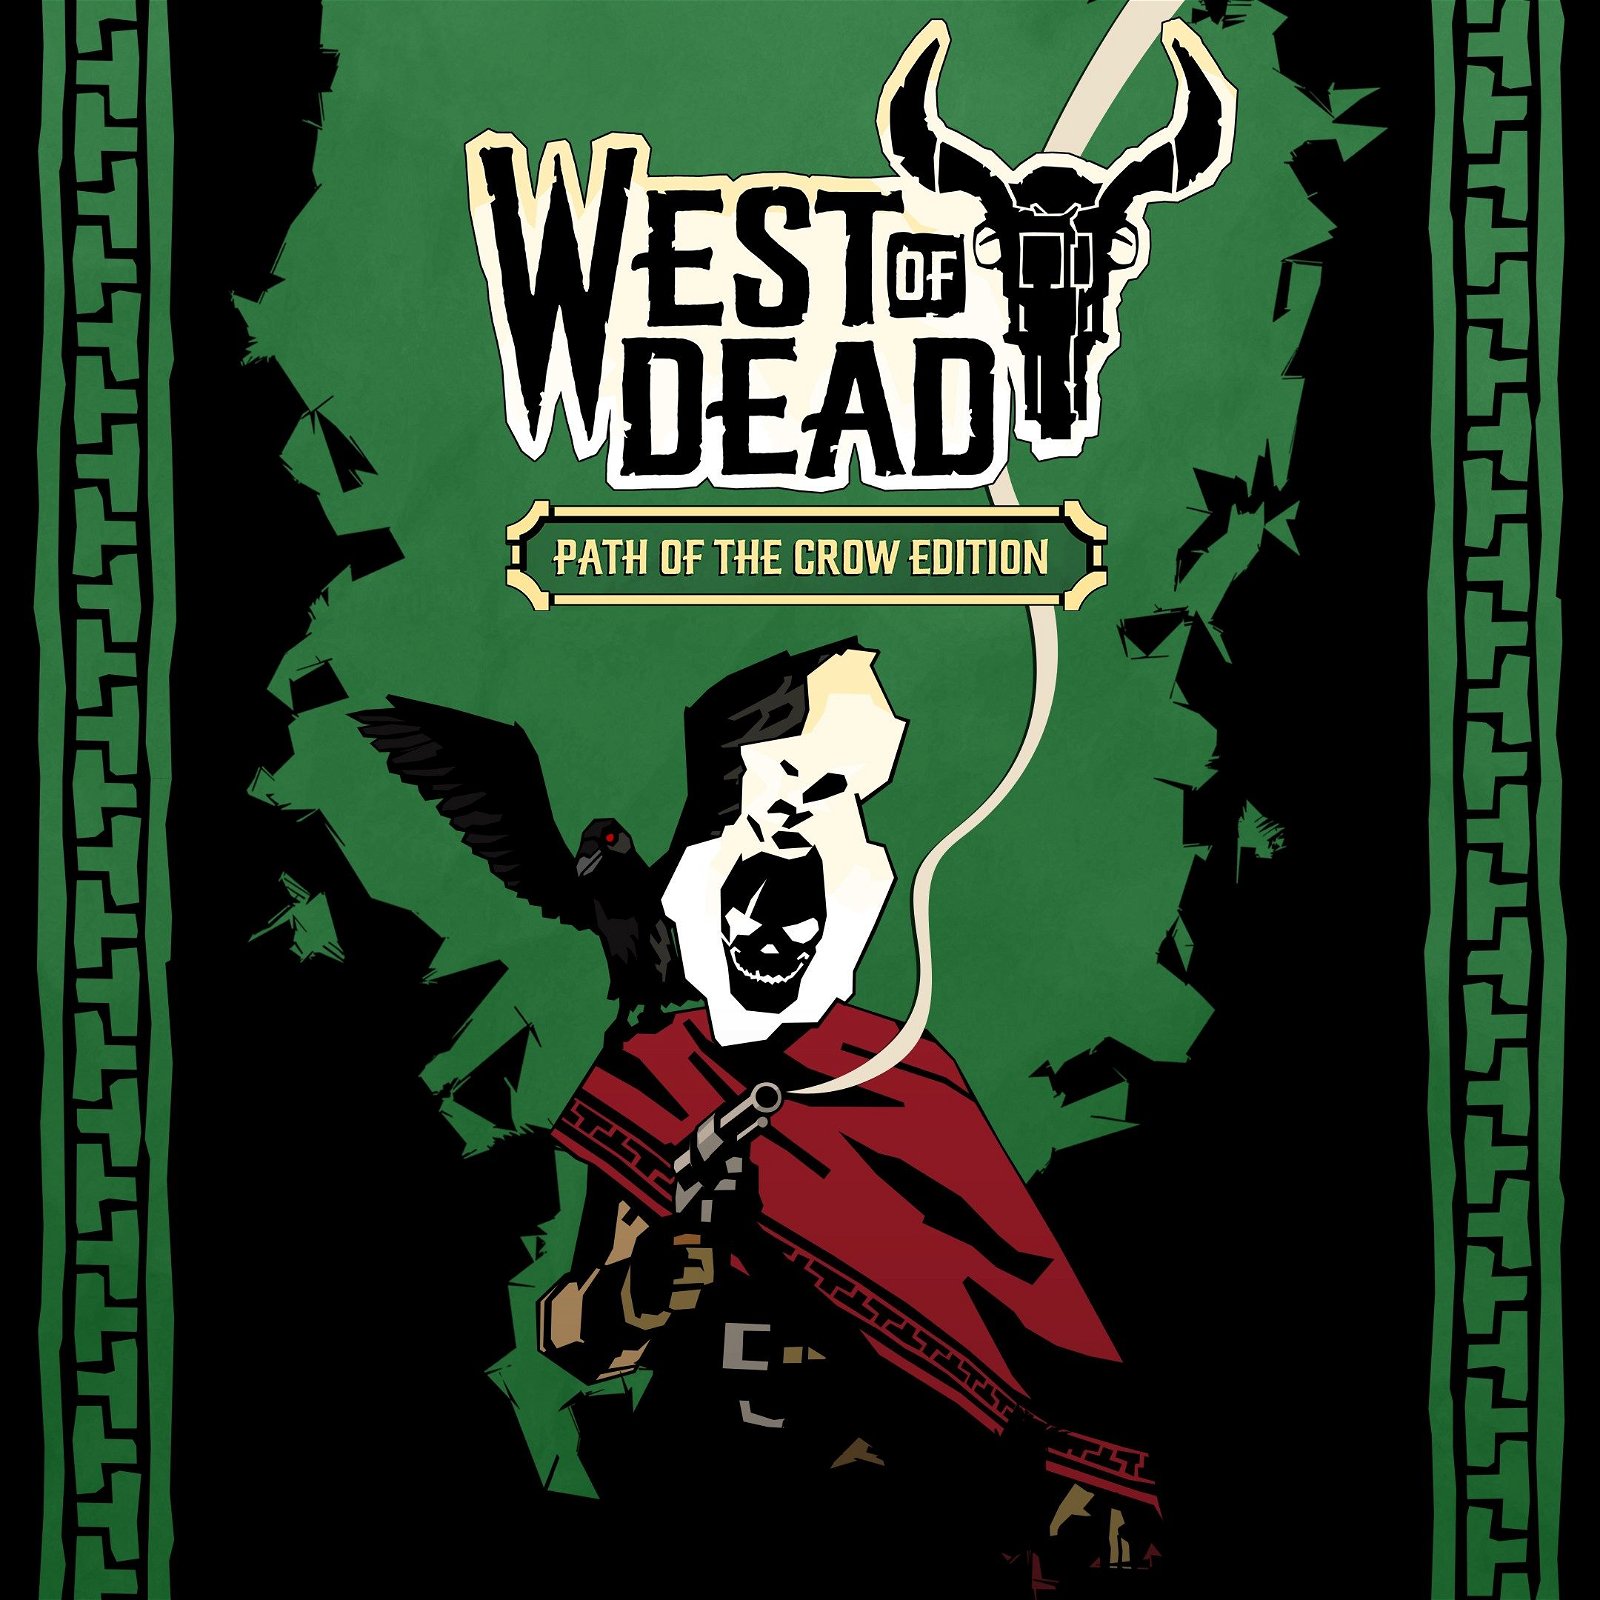 Image of West of Dead: Path of the Crow Edition